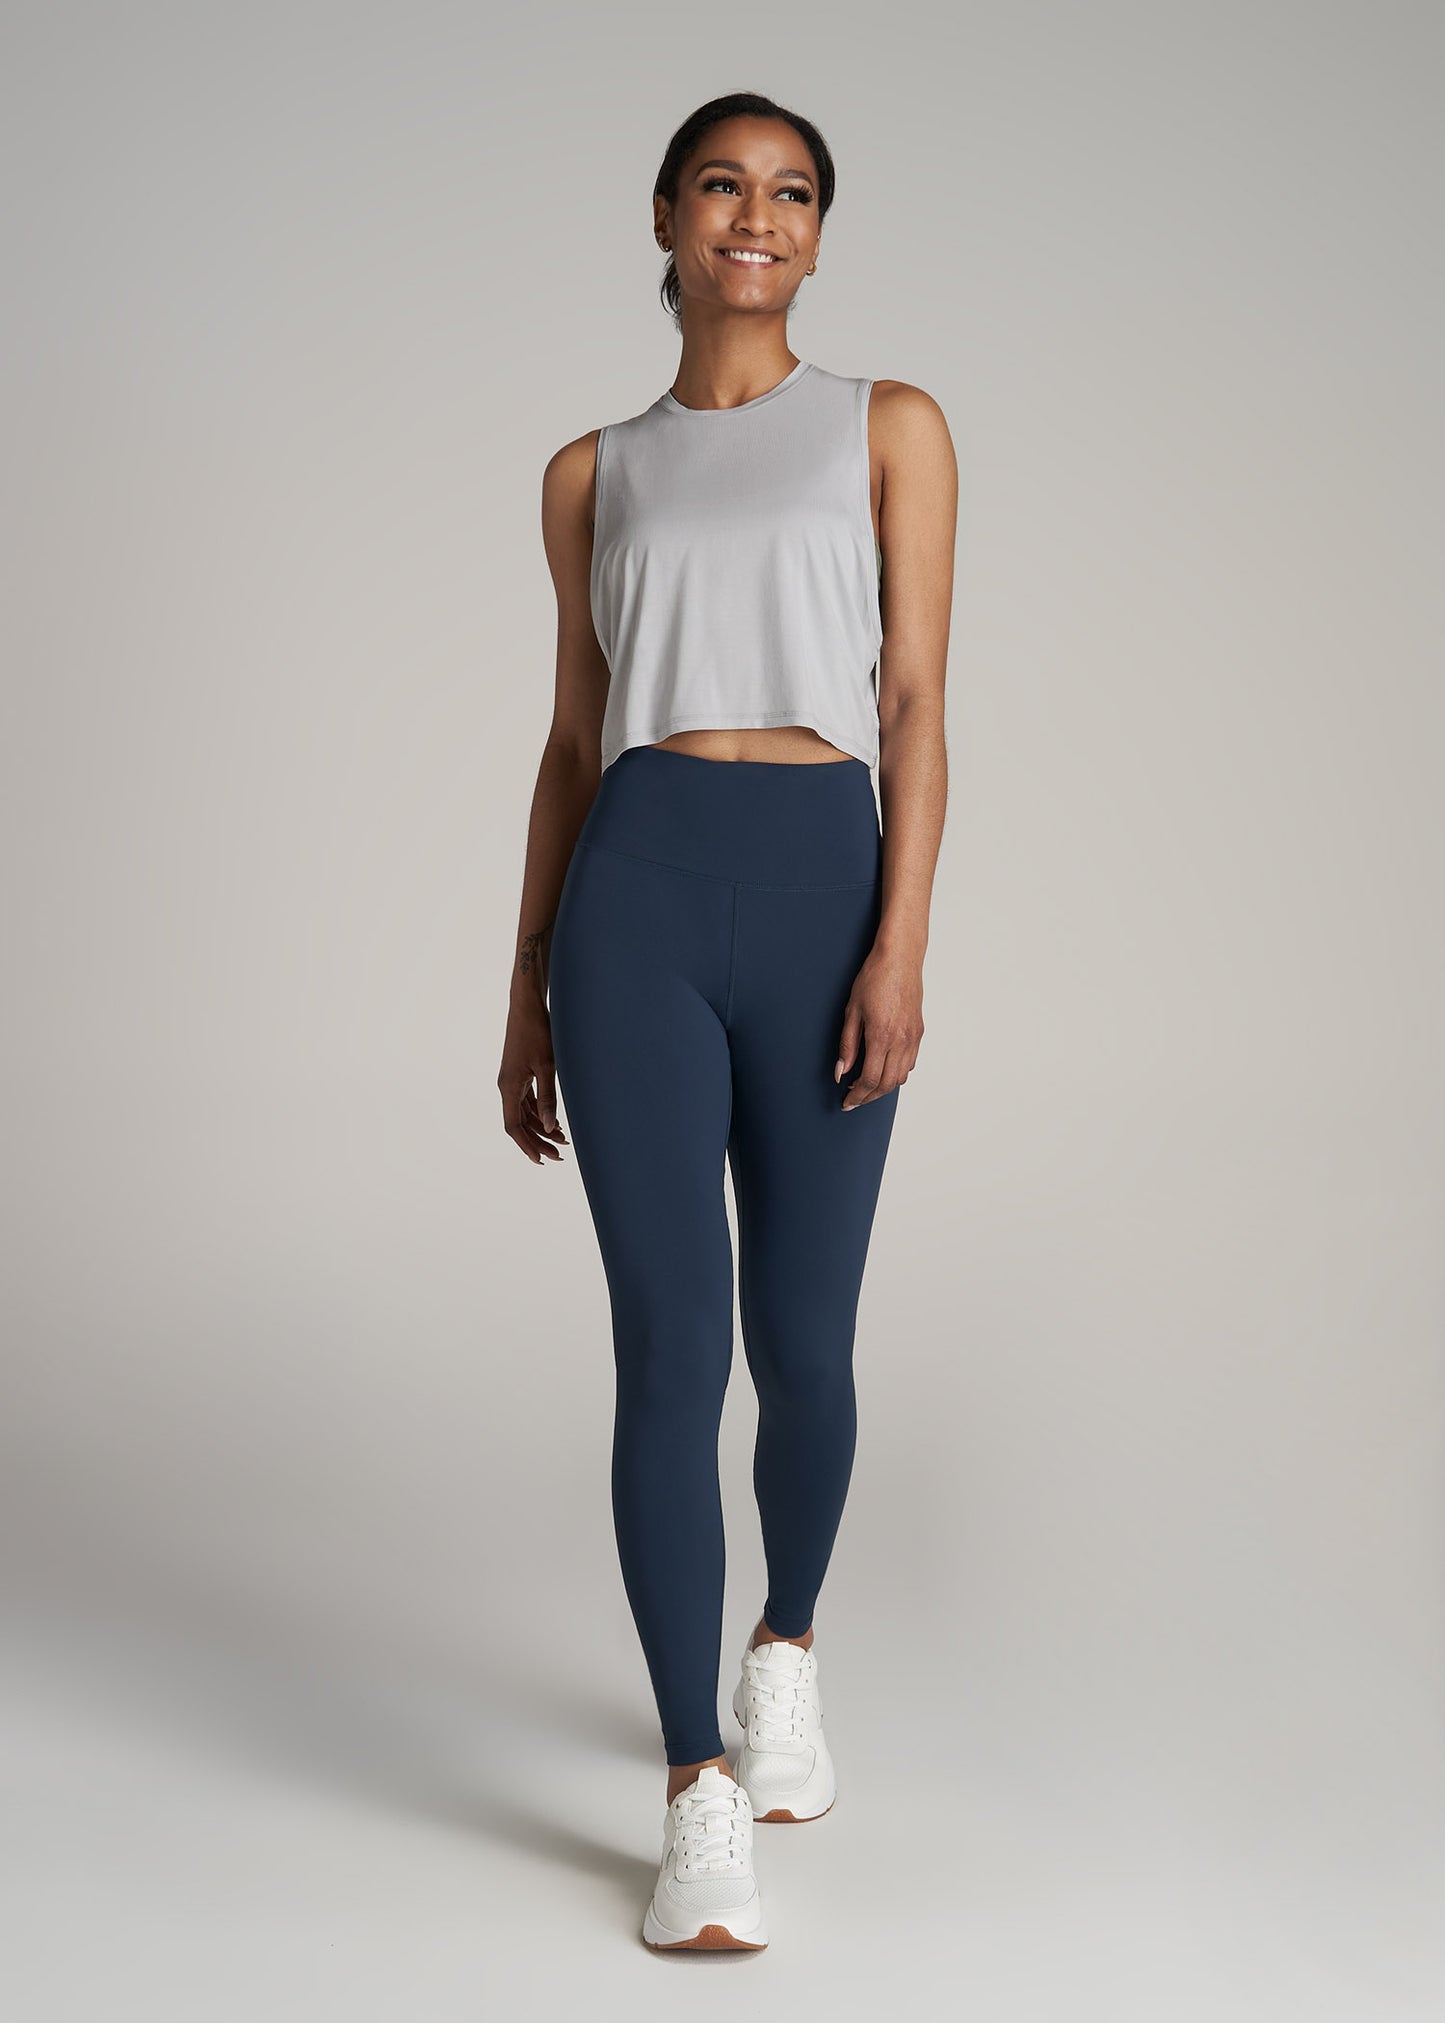 A tall woman wearing American Tall's Cropped Muscle Tank top in the color Silver.